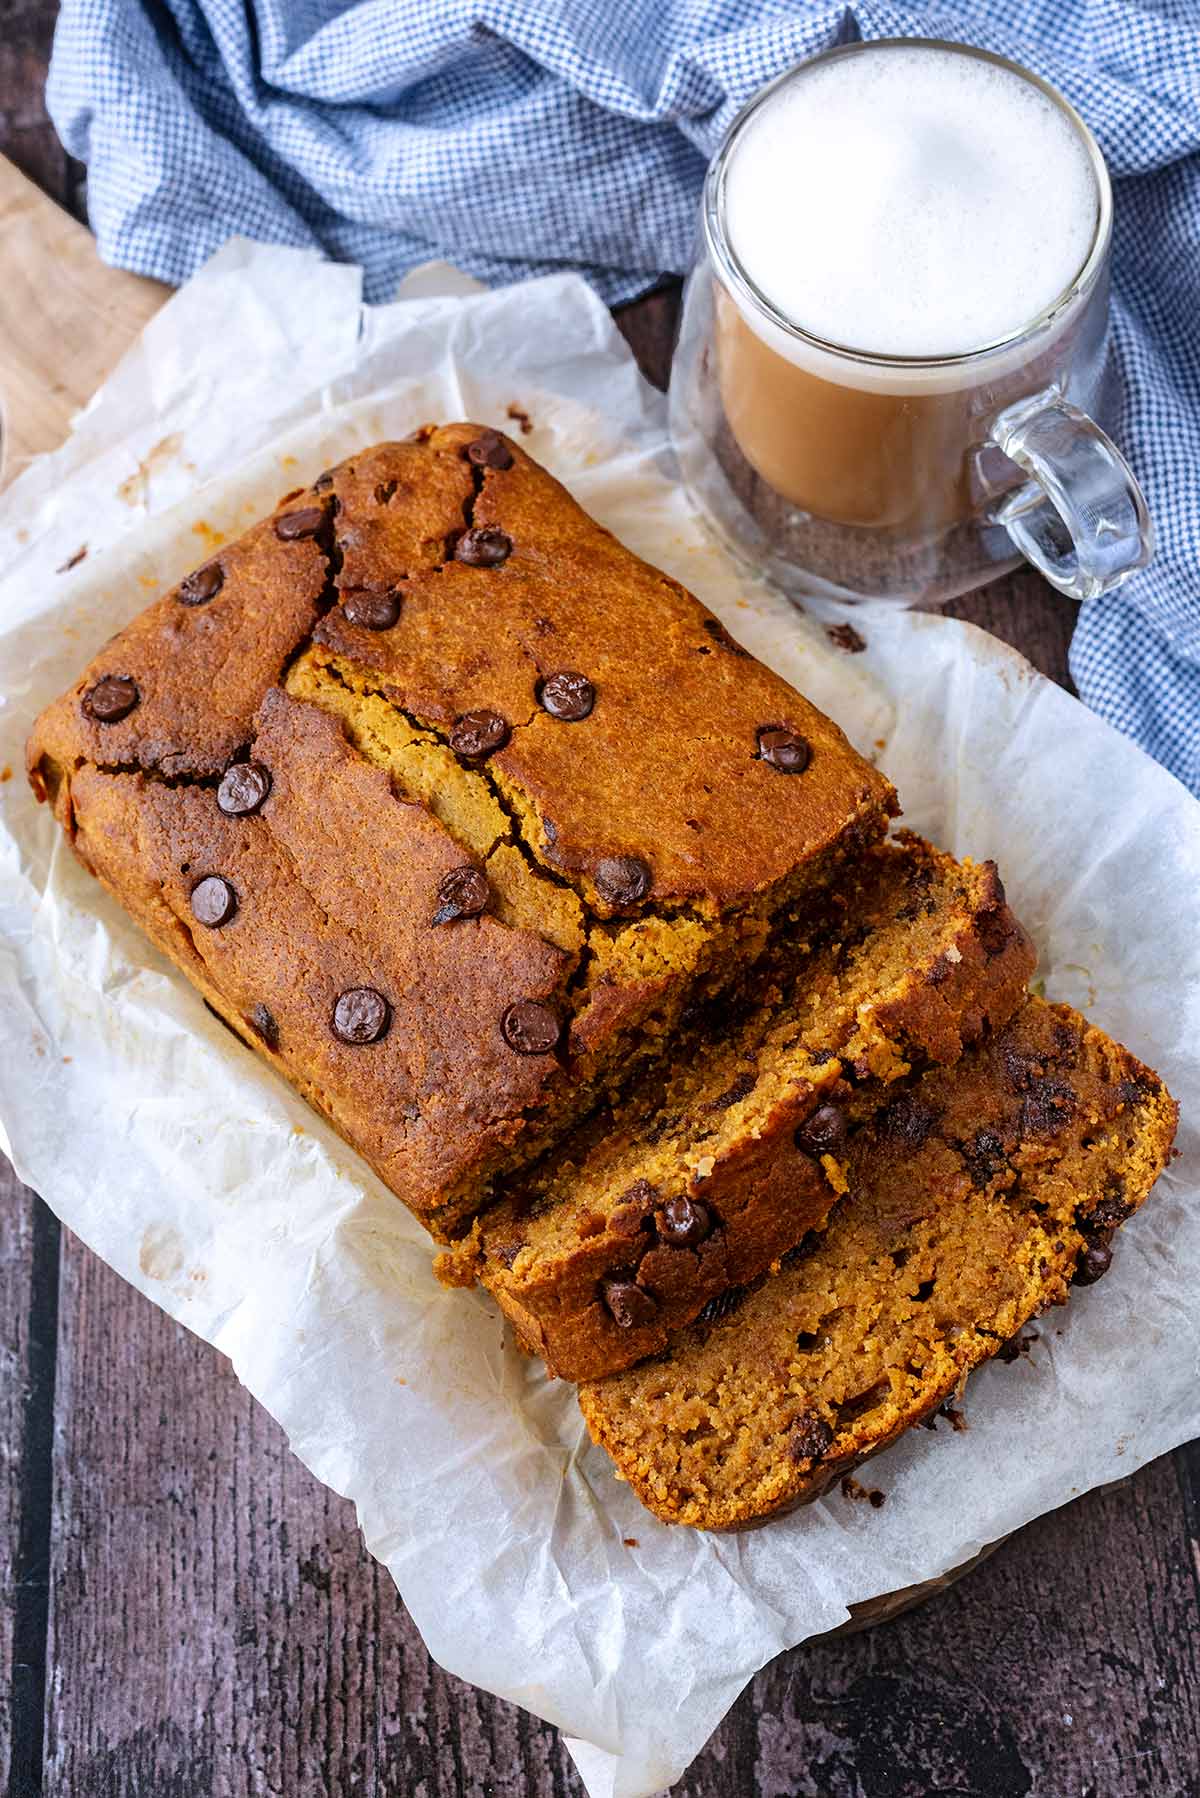 Pumpkin loaf cake next to a cup of coffee and a blue towel.